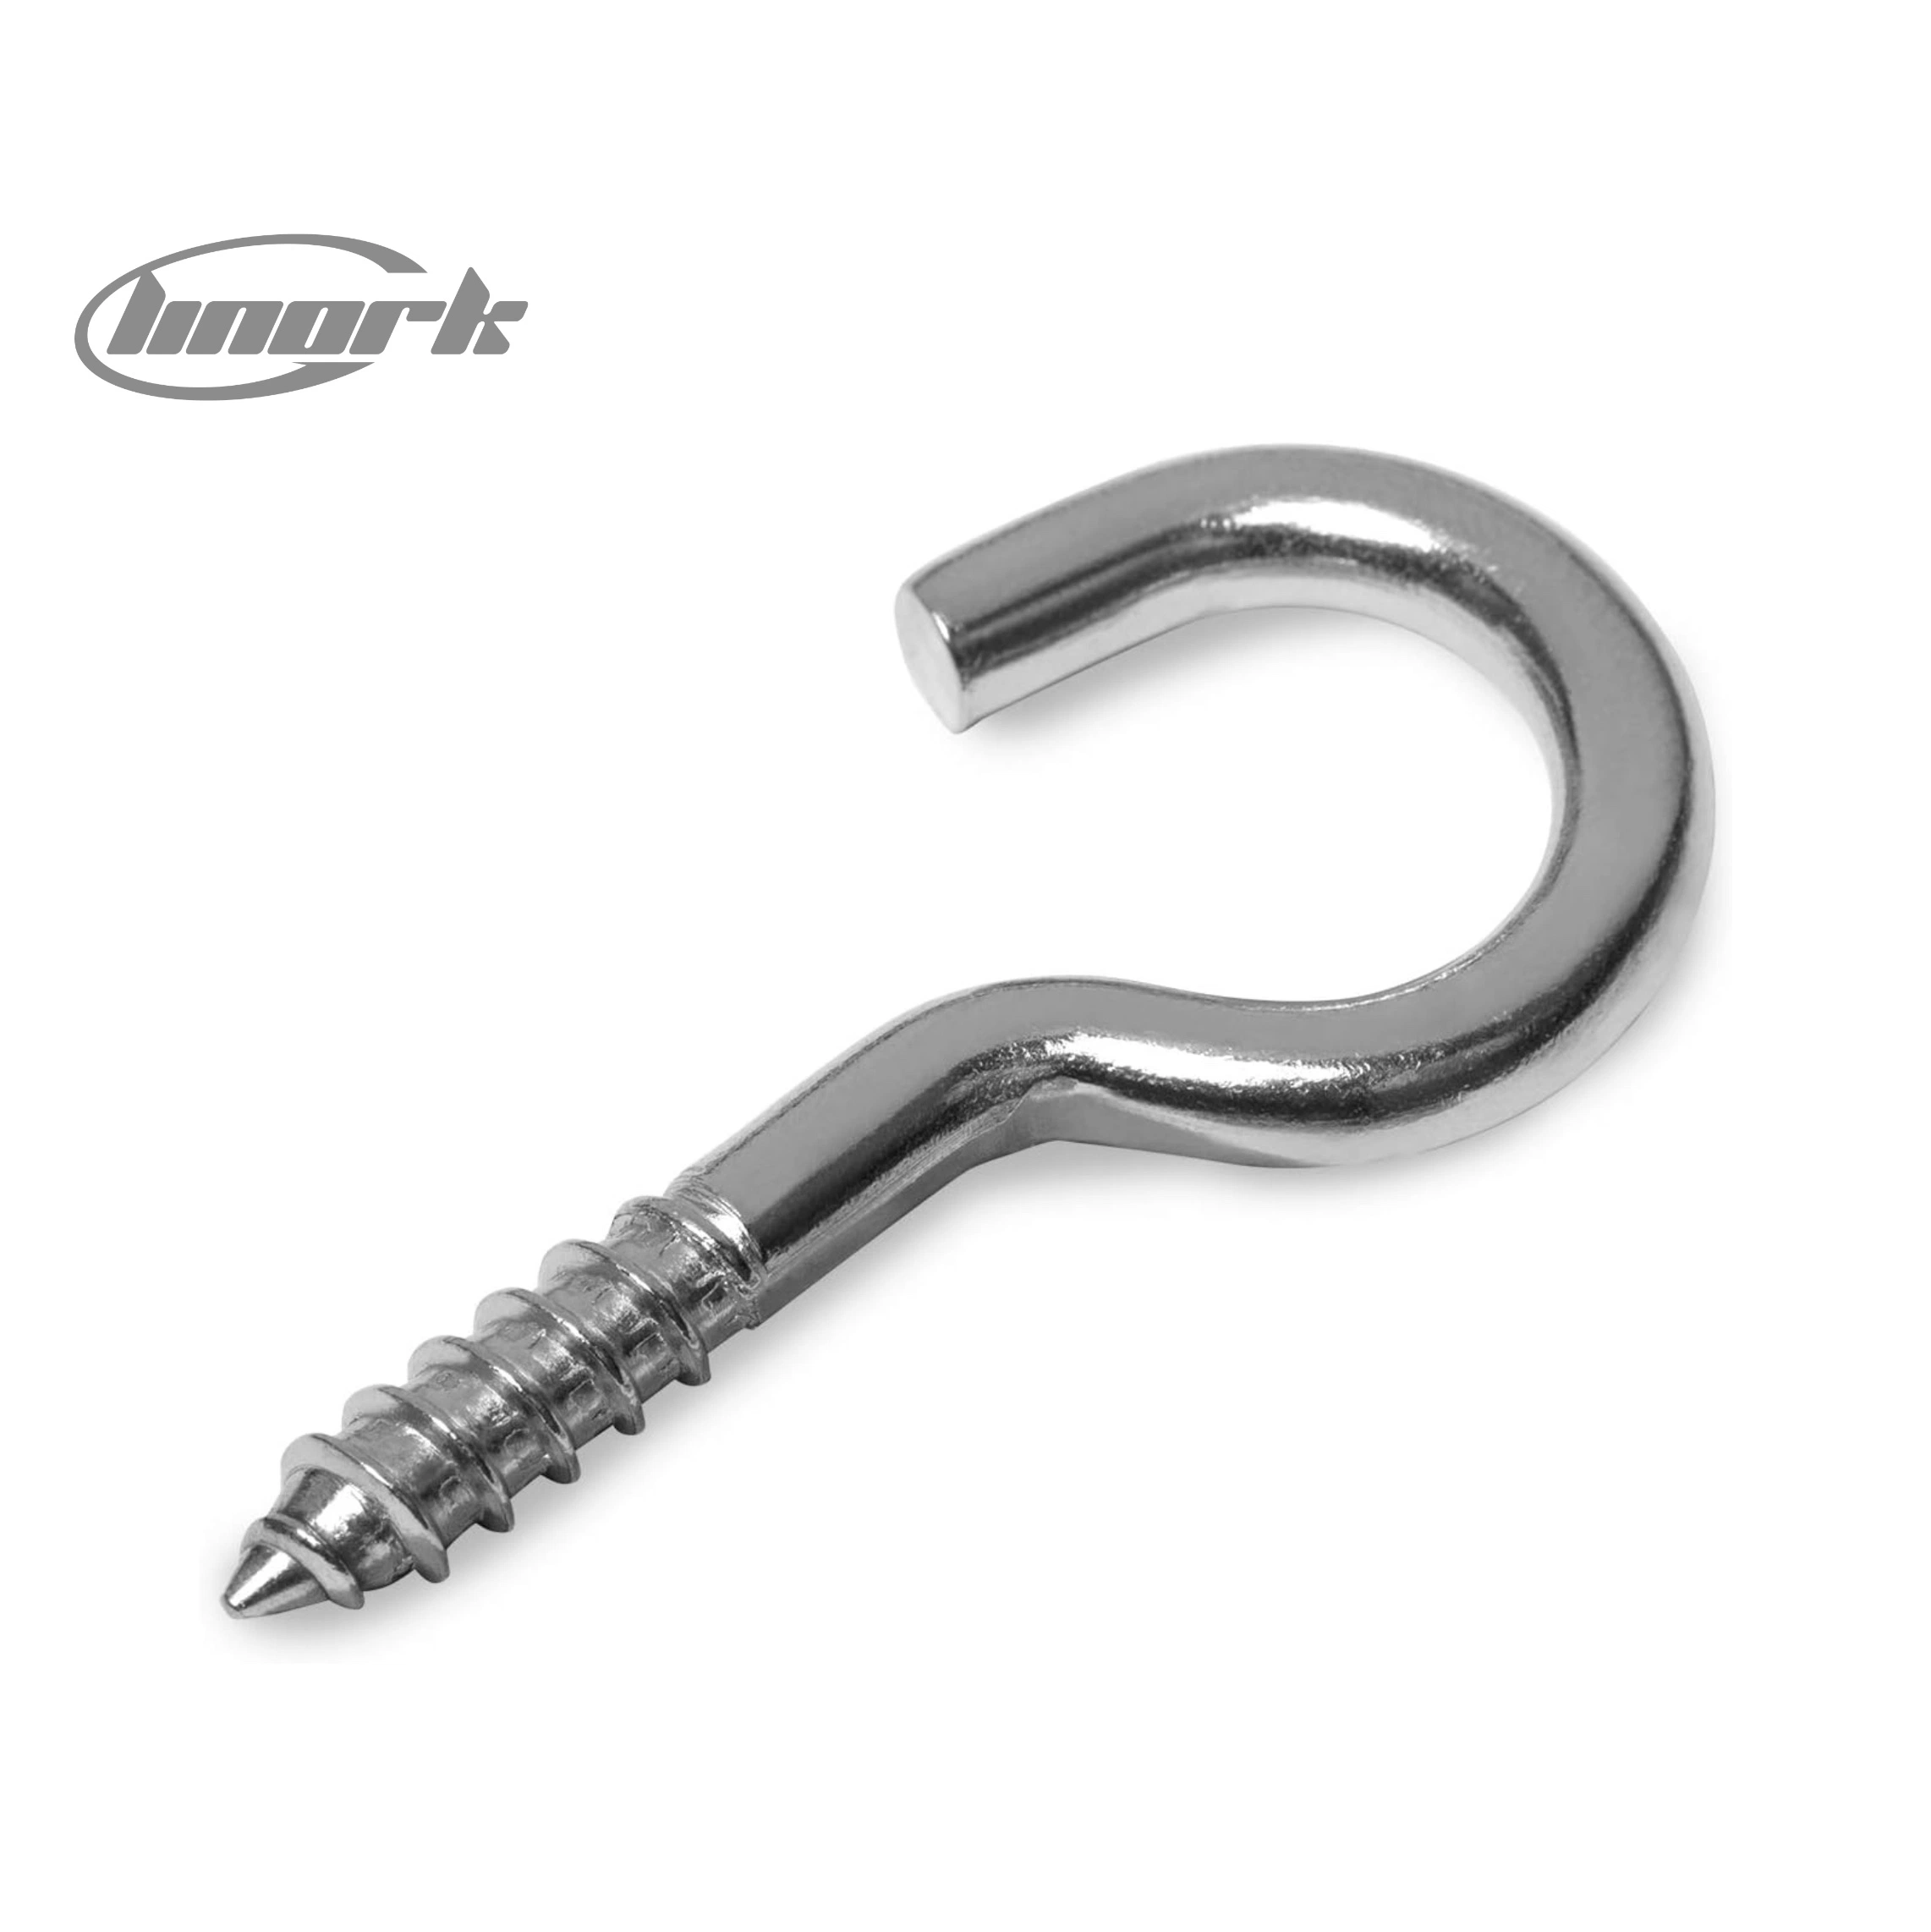 Heavy Tool AISI 304 Stainless Steel Screw Hooks with Wood Thread 5mmx56mm